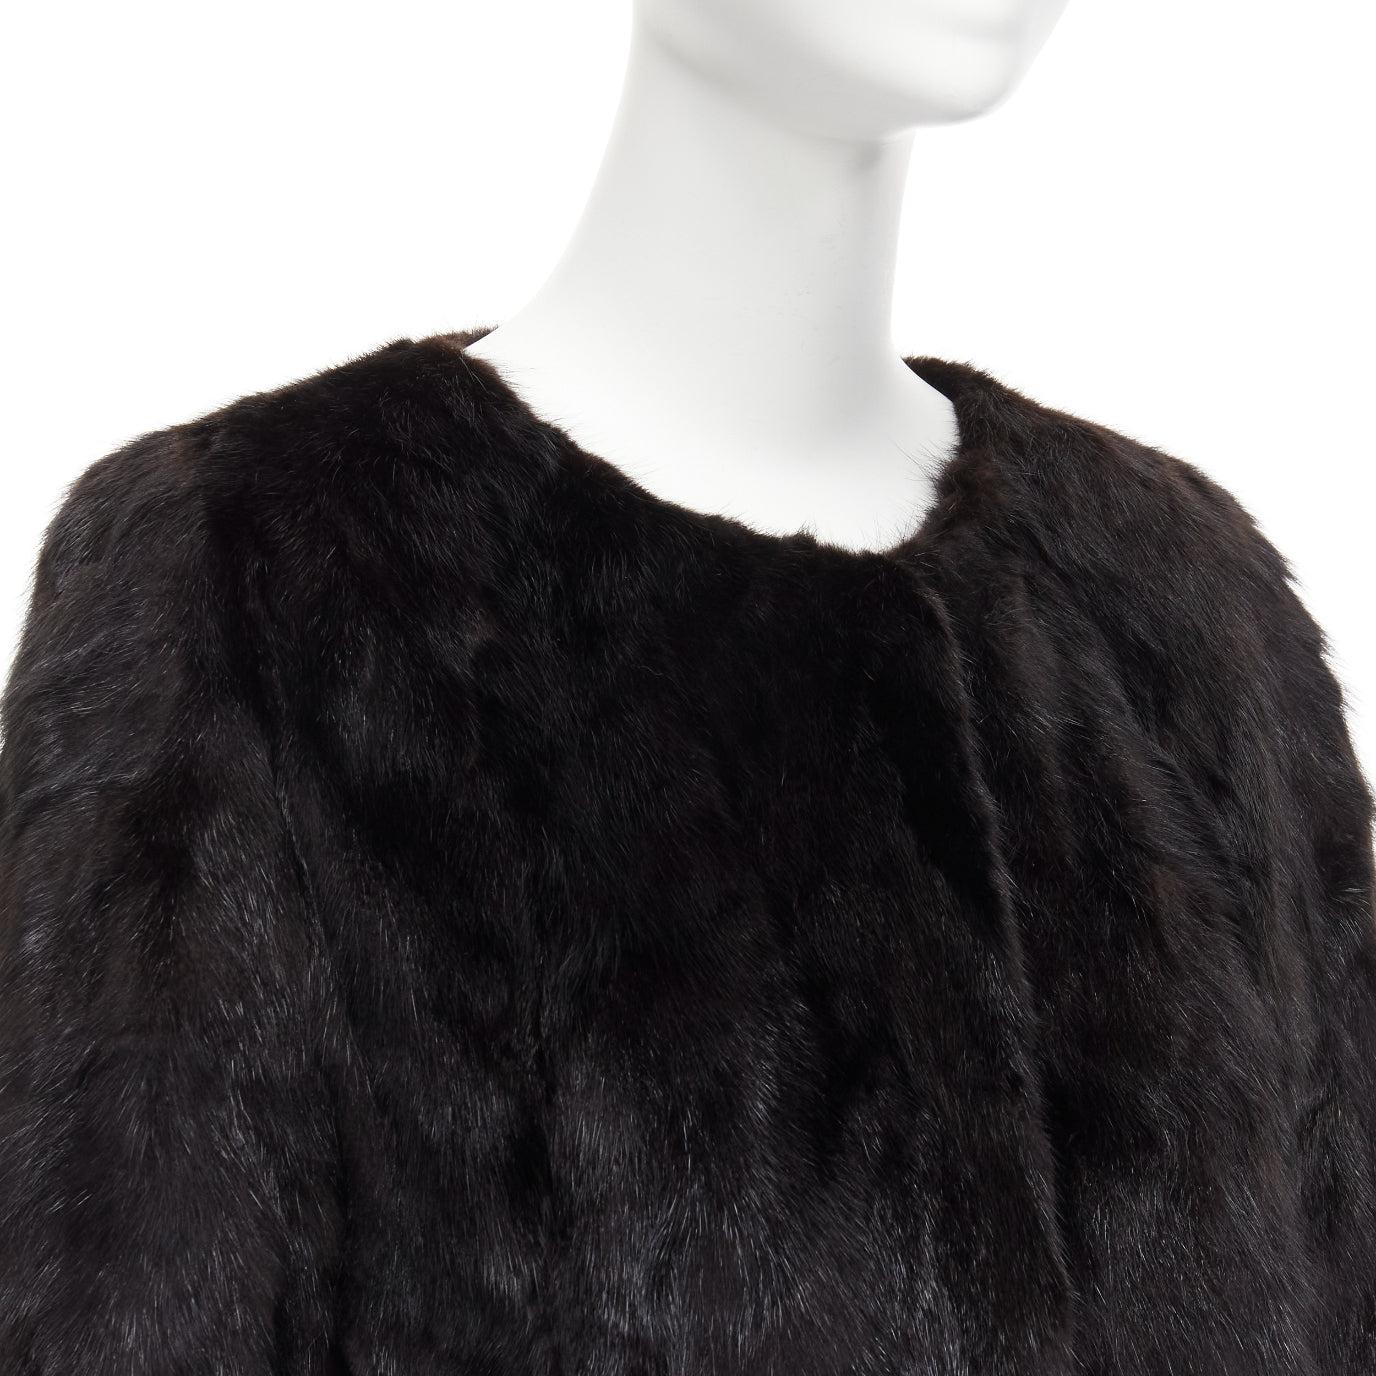 CHEVITTE dark brown genuine fur jewel neck cropped sleeves coat top M
Reference: DYTG/A00003
Brand: Chevitte
Material: Fur
Color: Brown
Pattern: Solid
Closure: Hook & Bar
Lining: Brown Fabric
Extra Details: Ruffle detail at collar